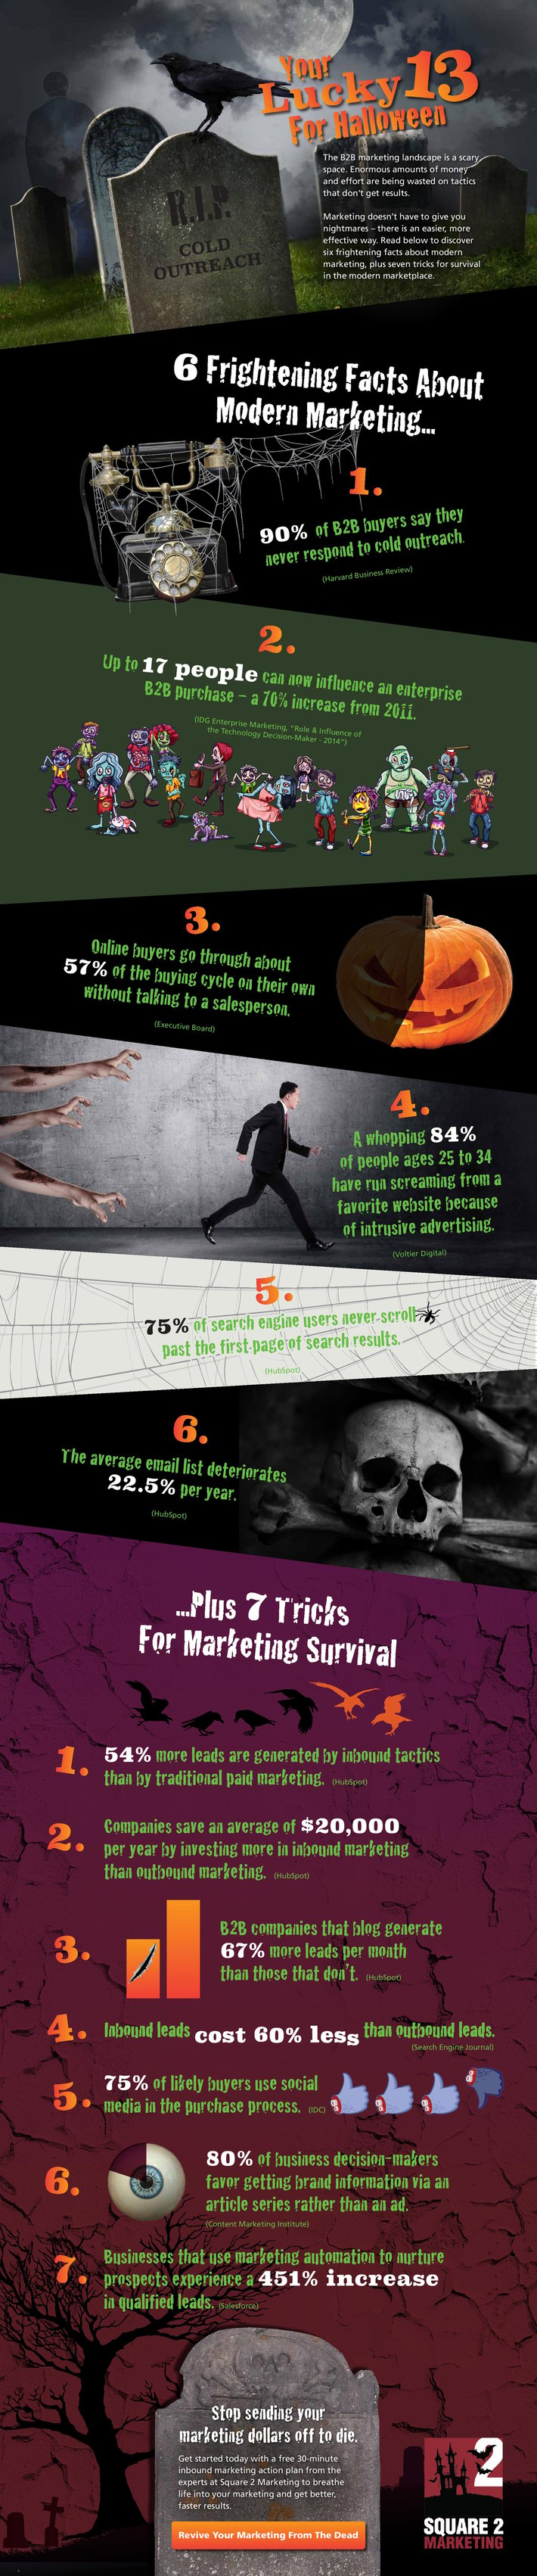 Scare2Marketing_6_Frightening_Facts_About_B2B_Marketing_Infographic.jpg